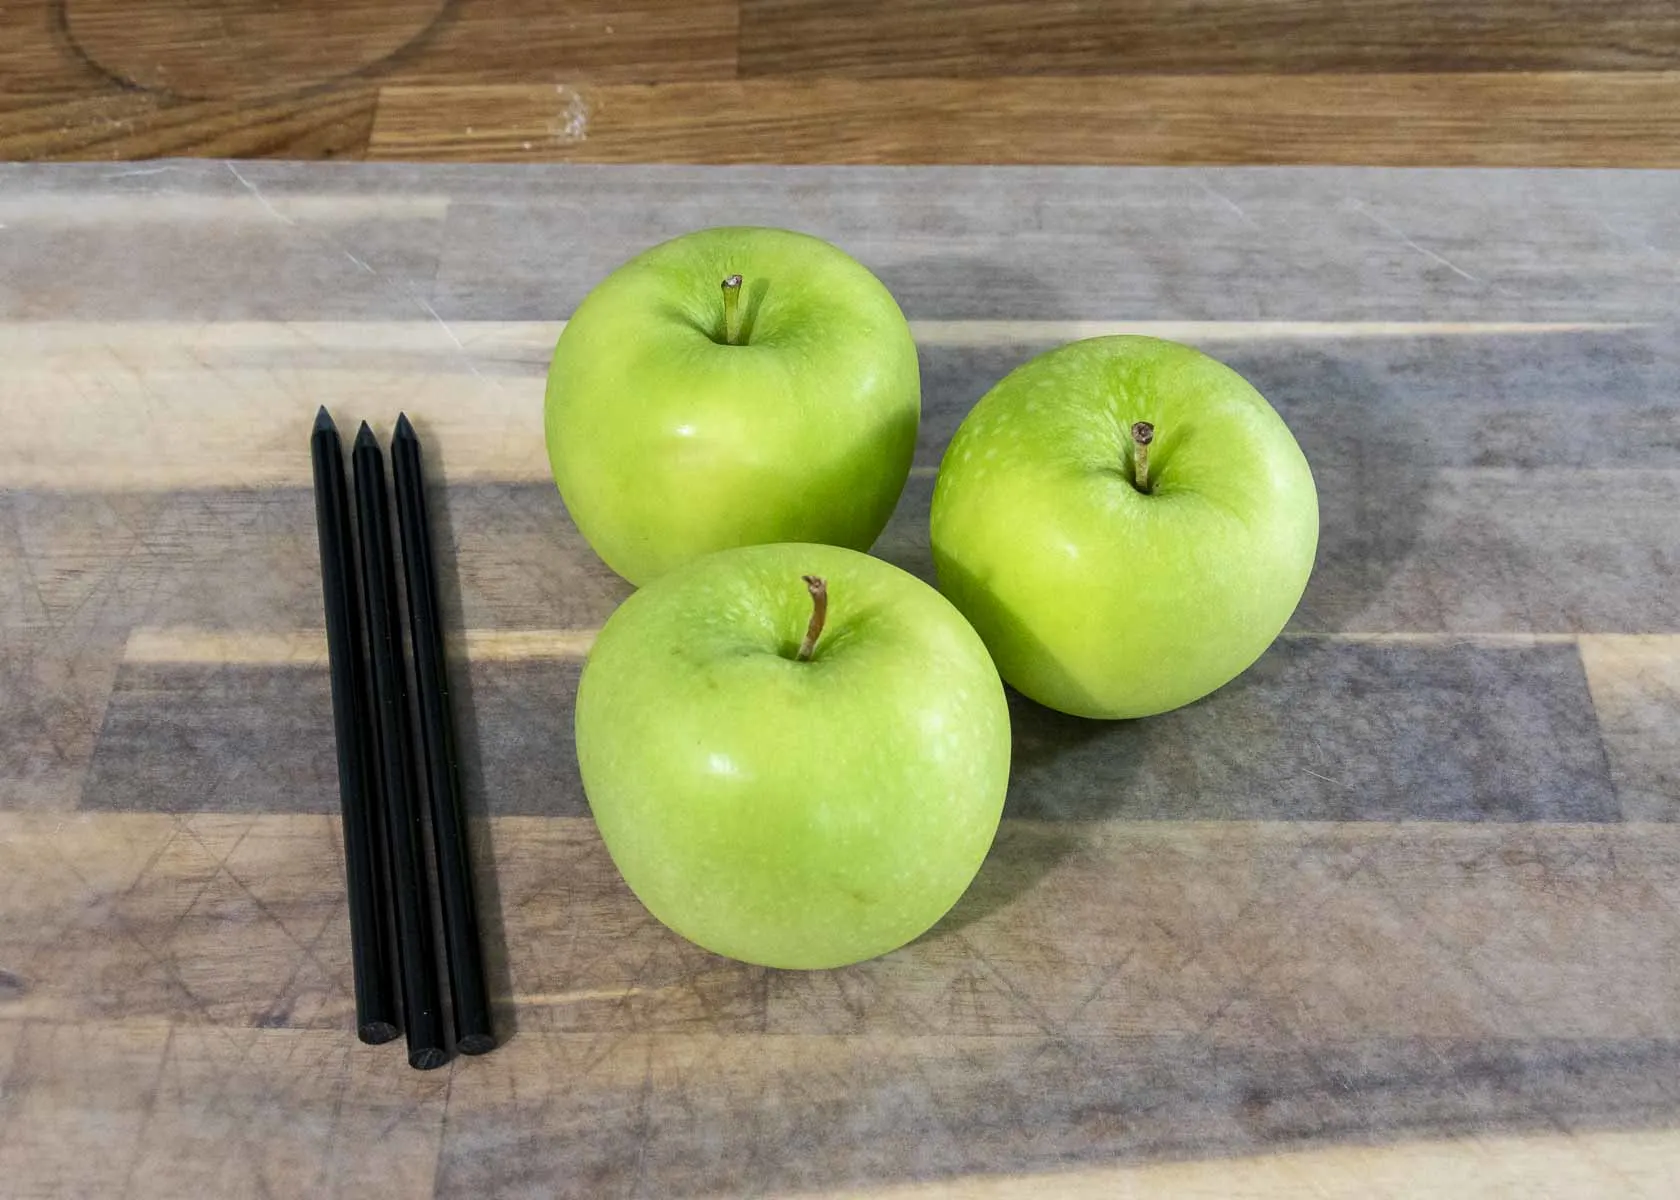 Three apples and three sticks on a wax-paper-lined cutting board.